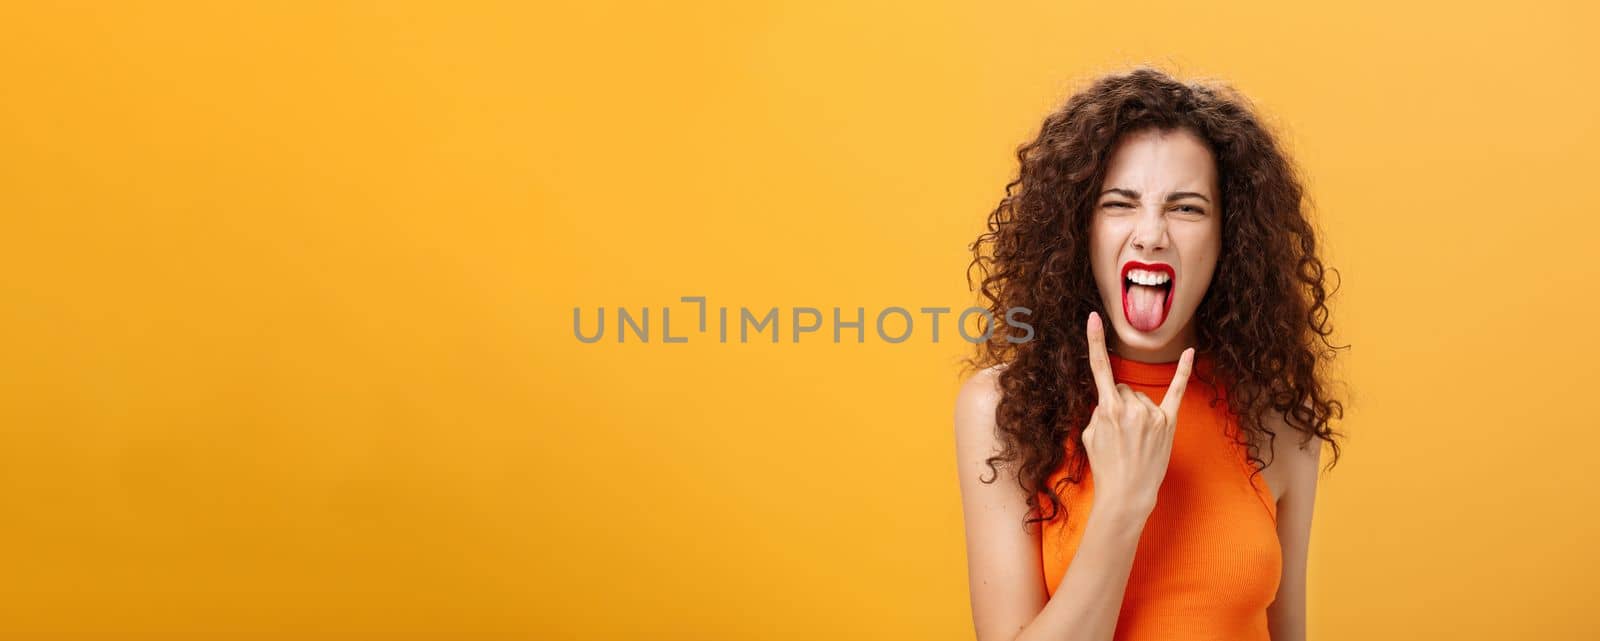 Carefree rebellious stylish urban female with curly hairstyle. sticking out tongue yelling from satisfaction and joy showing rock n roll sign chilling and enjoying cool concert over orange background.